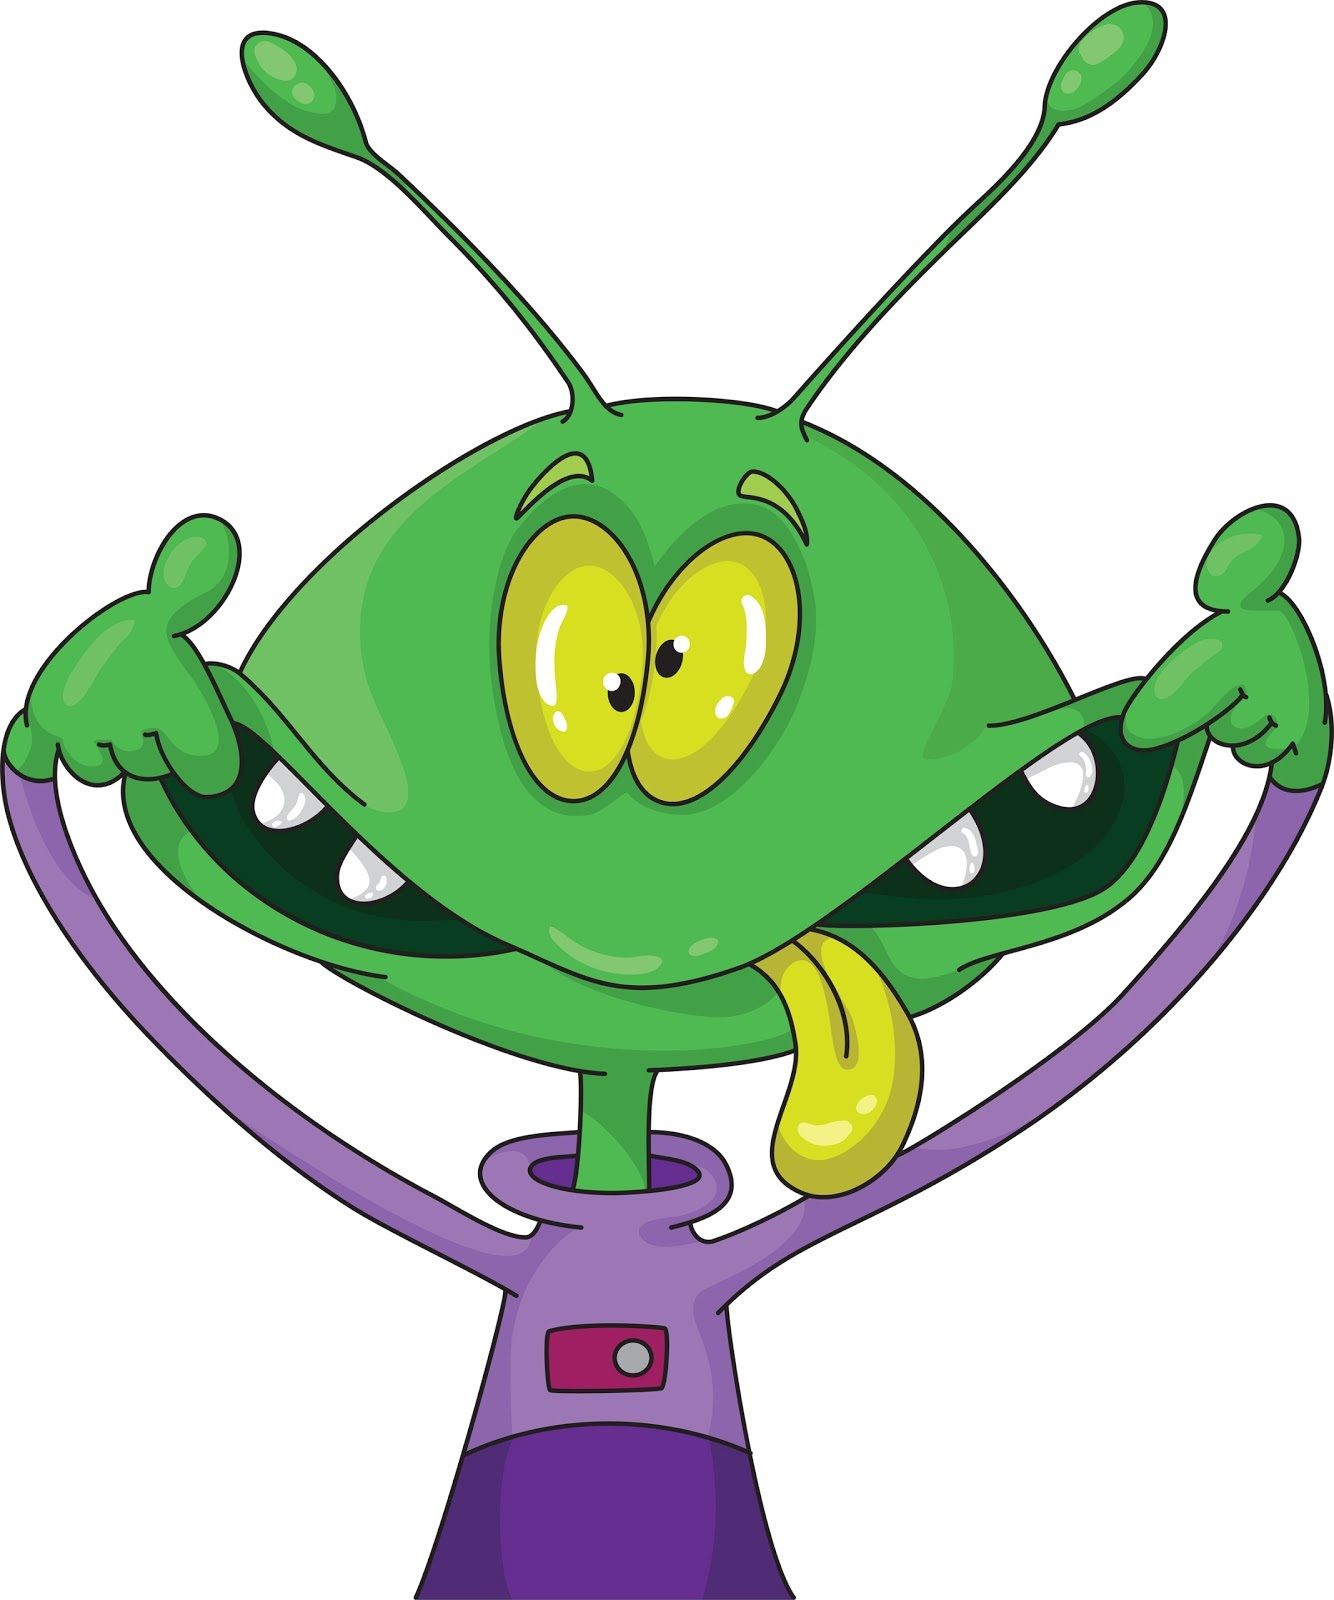 Spaceship clipart friendly. Alien pictures for kids